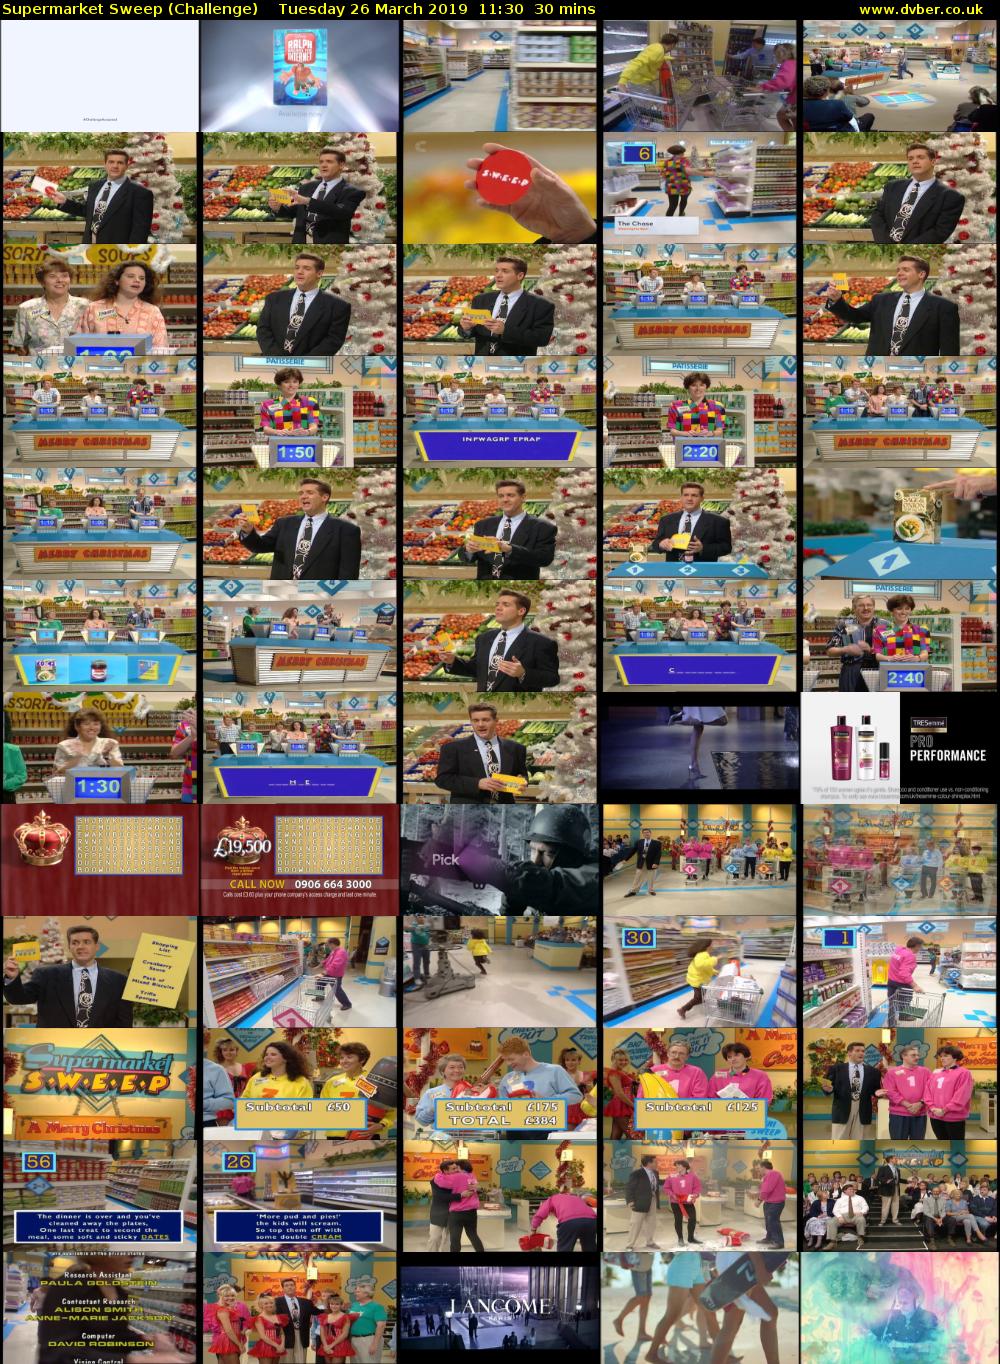 Supermarket Sweep (Challenge) Tuesday 26 March 2019 11:30 - 12:00